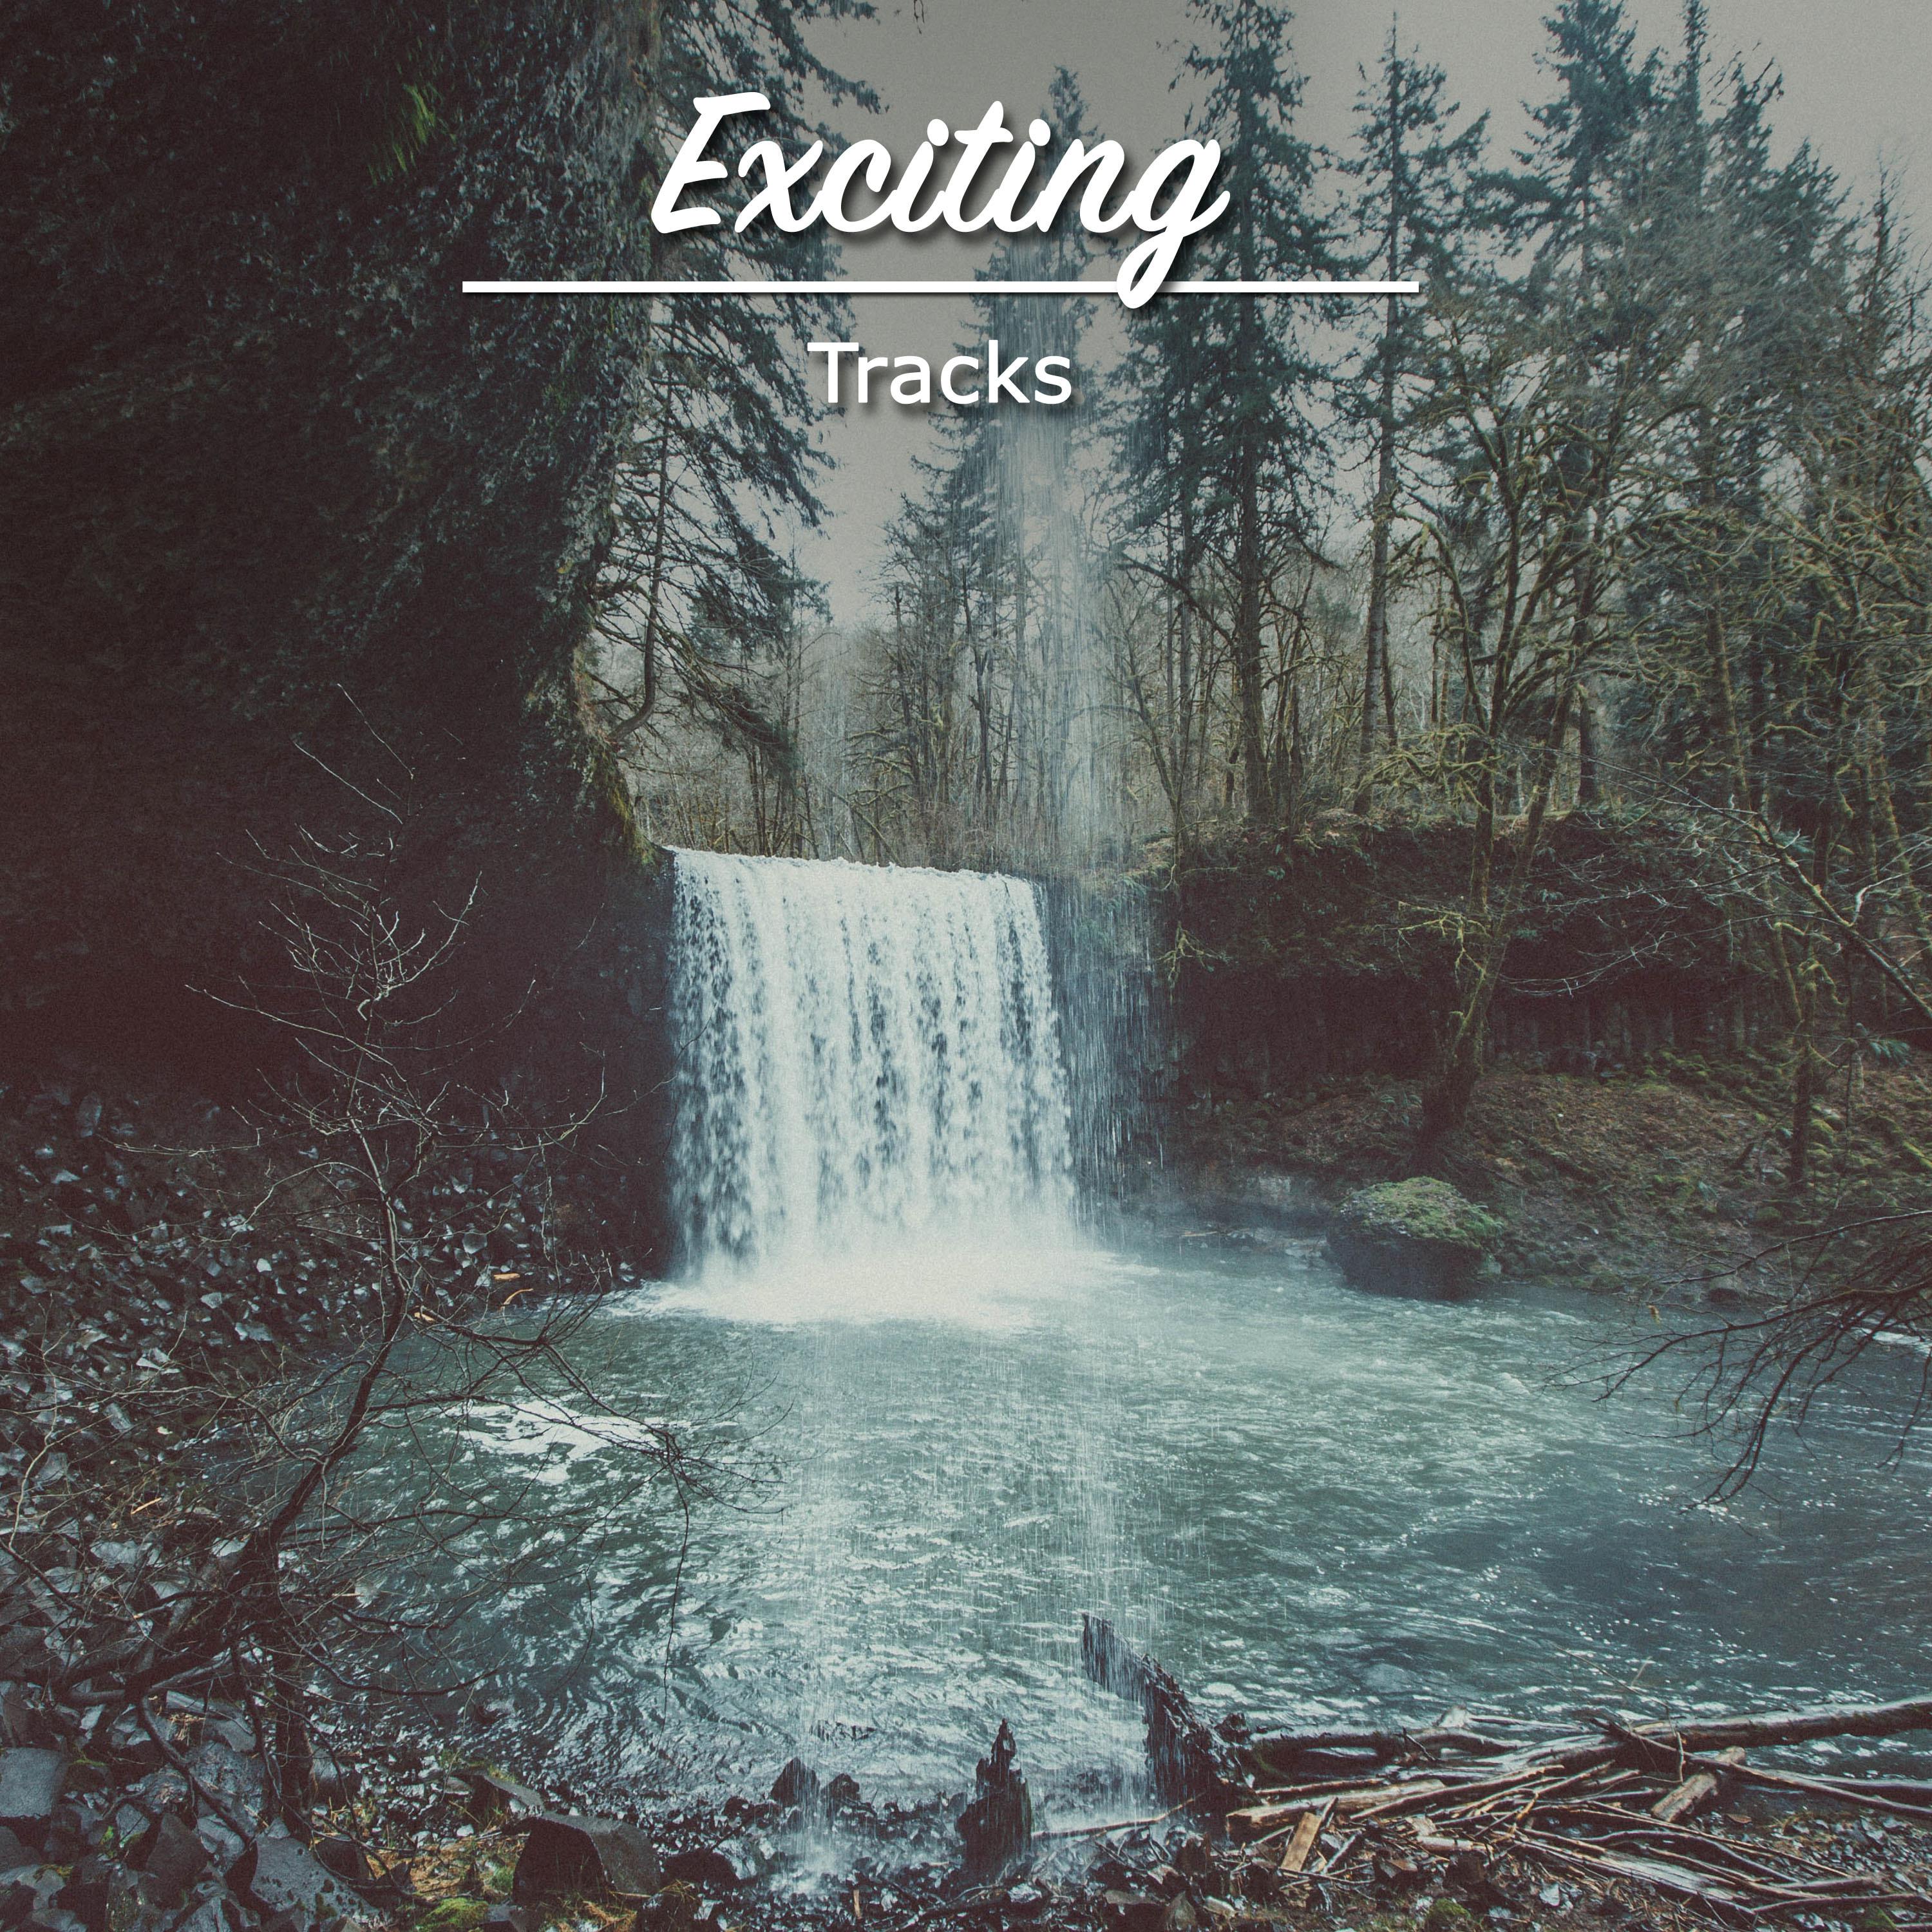 #15 Exciting Tracks for Buddhist Meditation & Relaxation